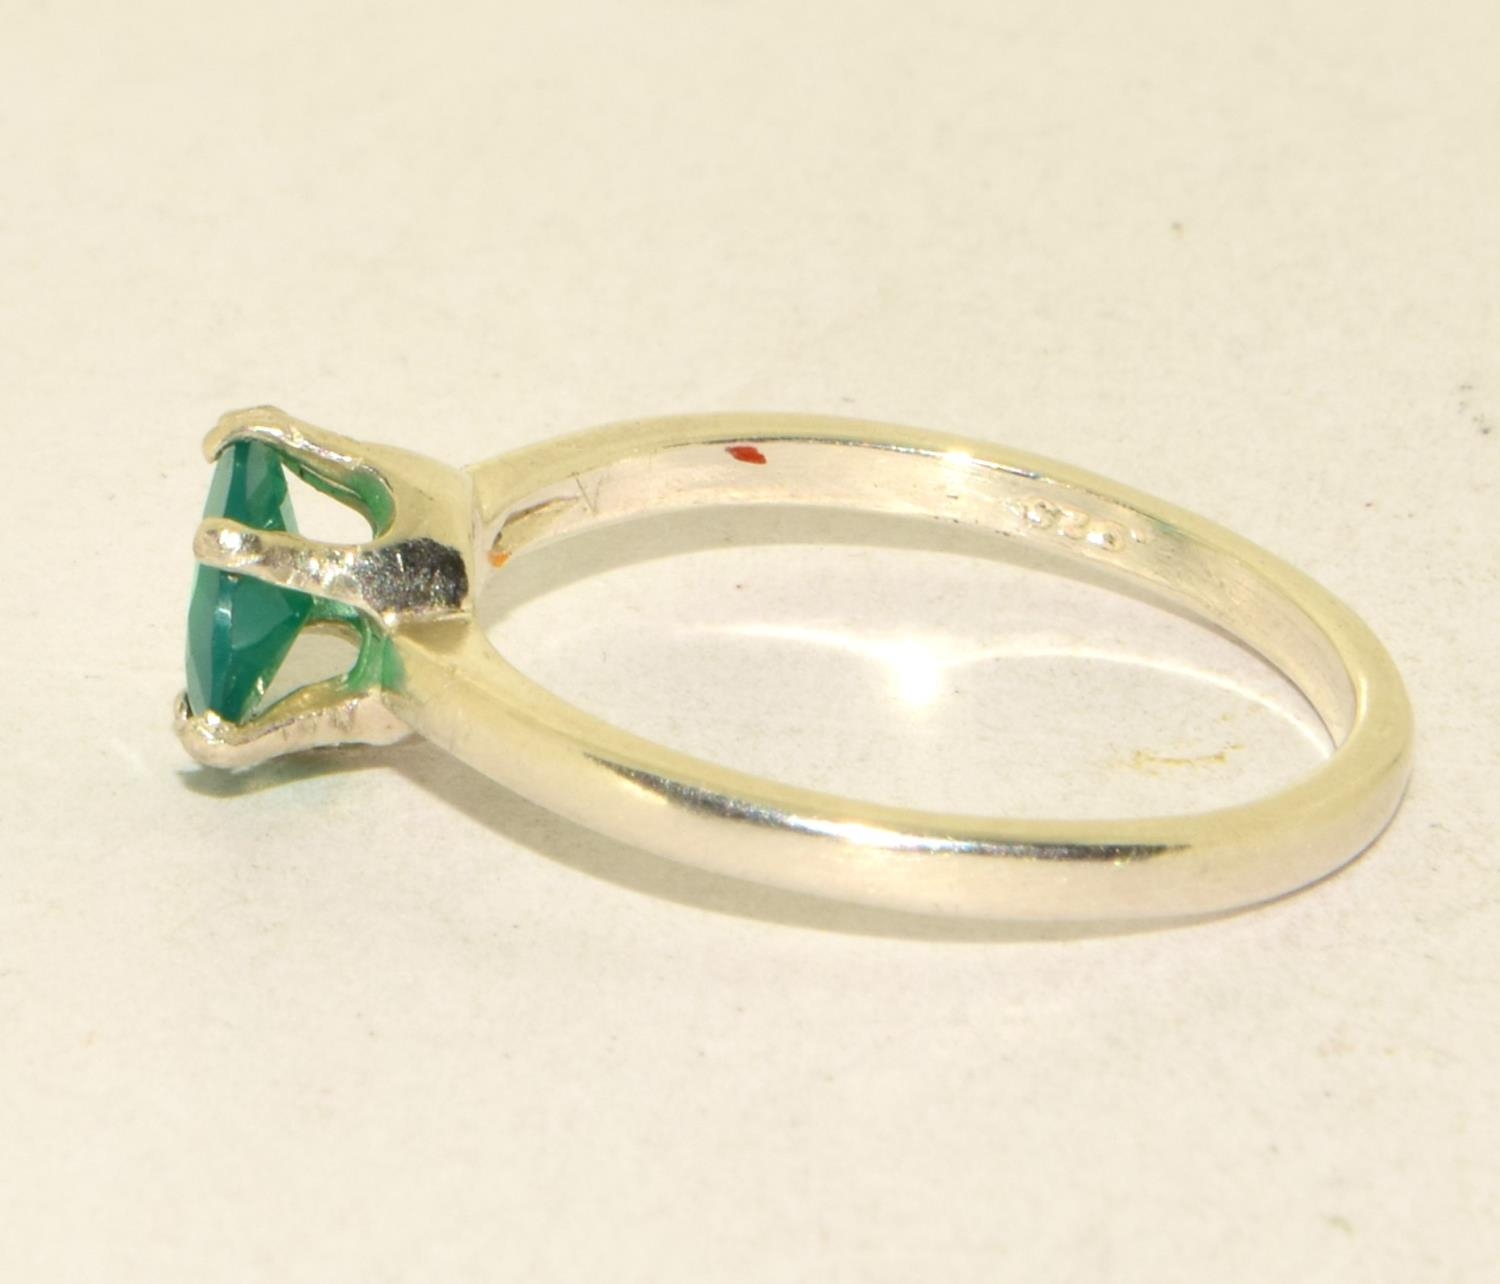 A 925 silver solitaire green stone ring Size P 1/2. - Image 2 of 3